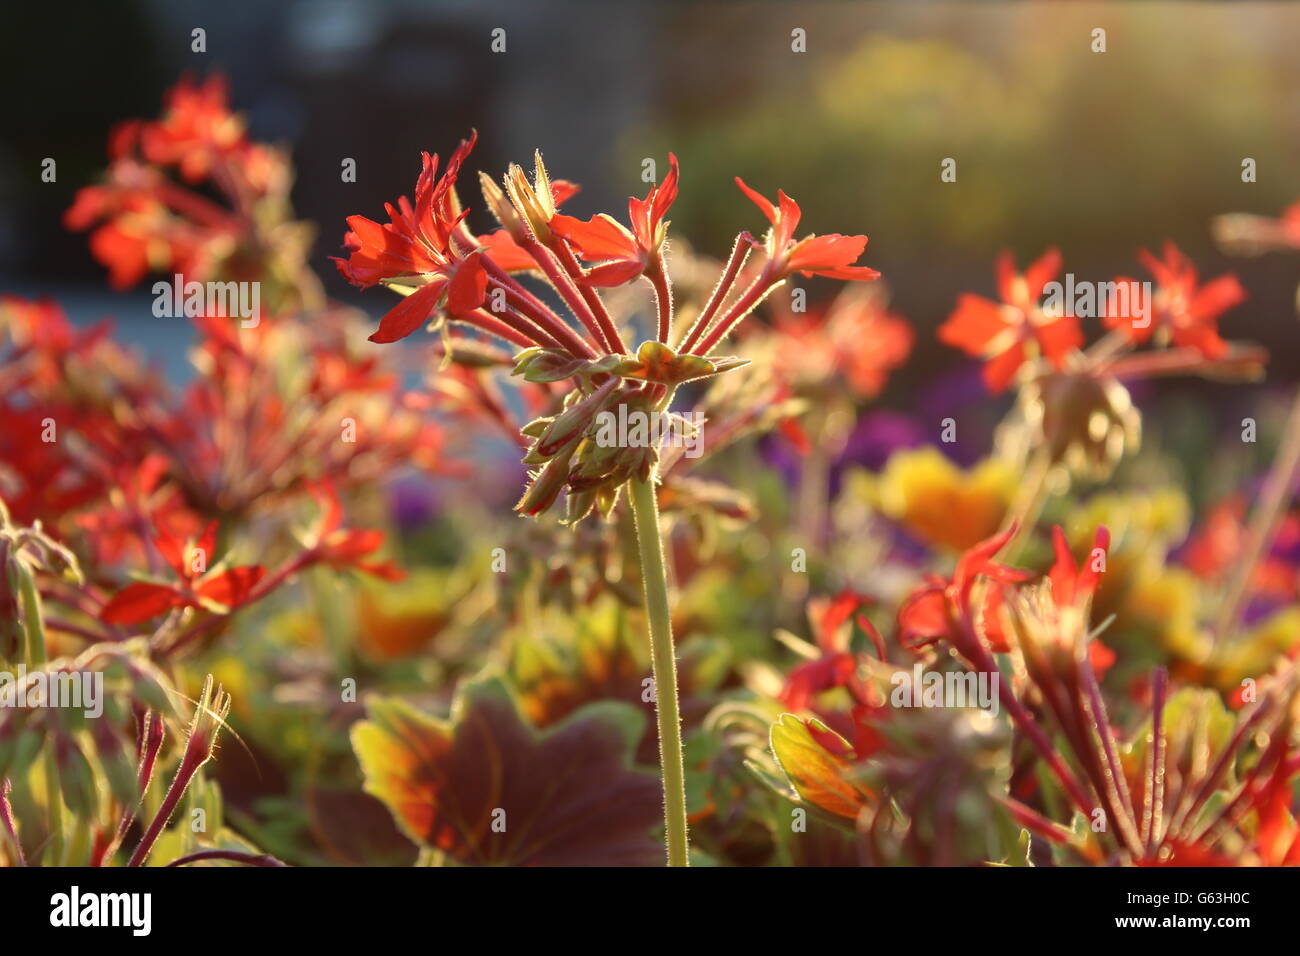 Close-up patch of colorful flowers in the sunlight. Stock Photo